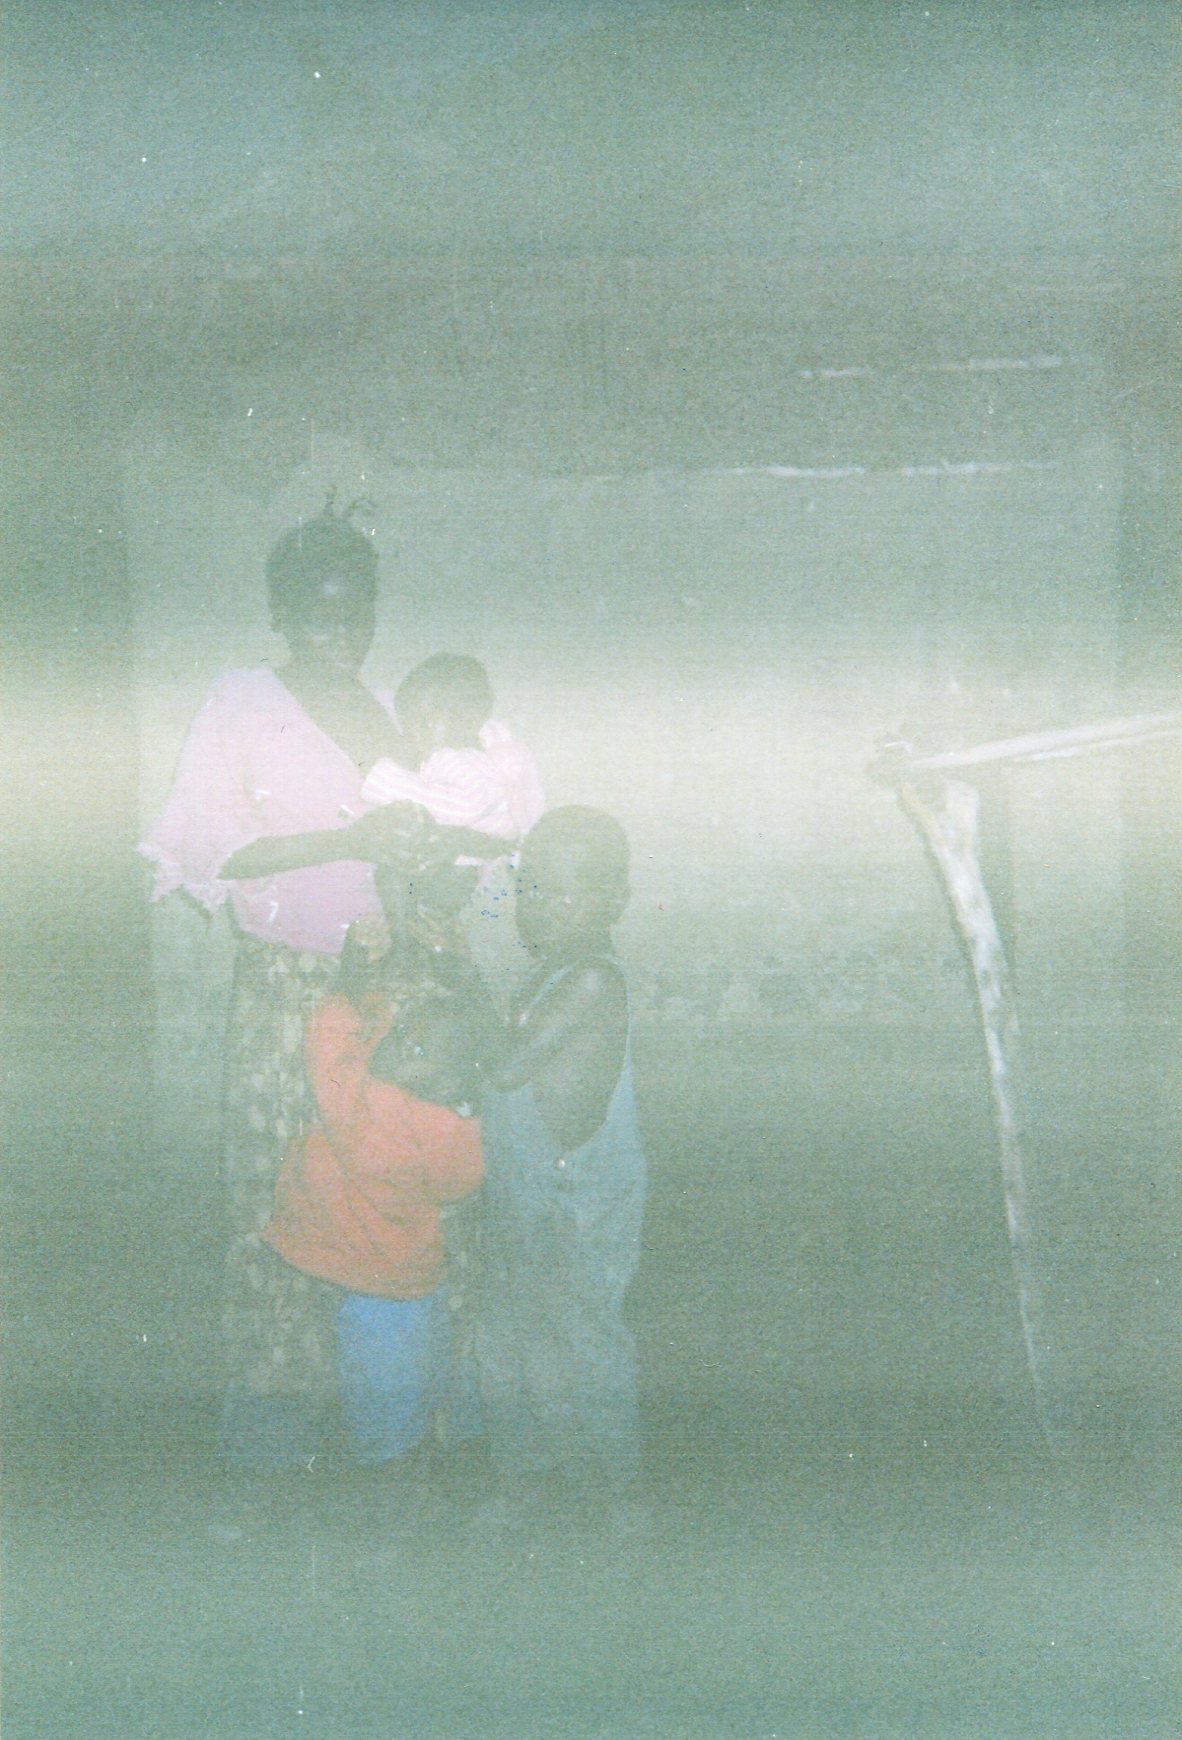  This photo of me and my children shows how we suffered without food and shelter. We continue to suffer until today.   